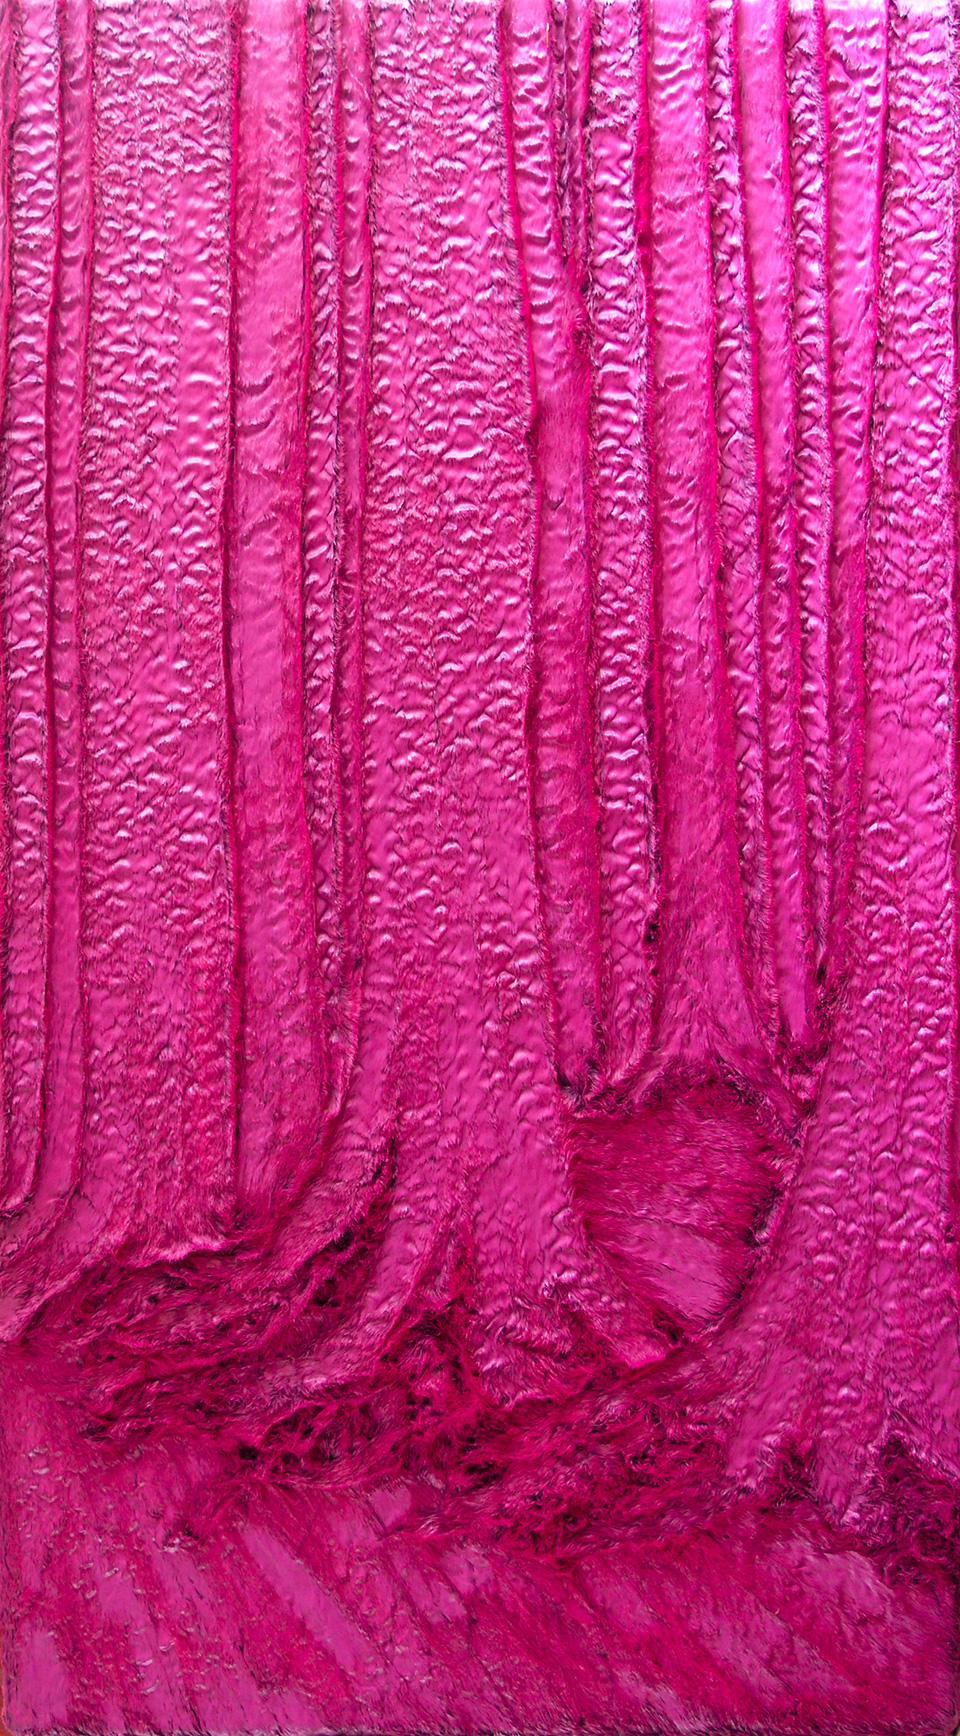 Pink Forest 1, a painting by Guido Vrolix